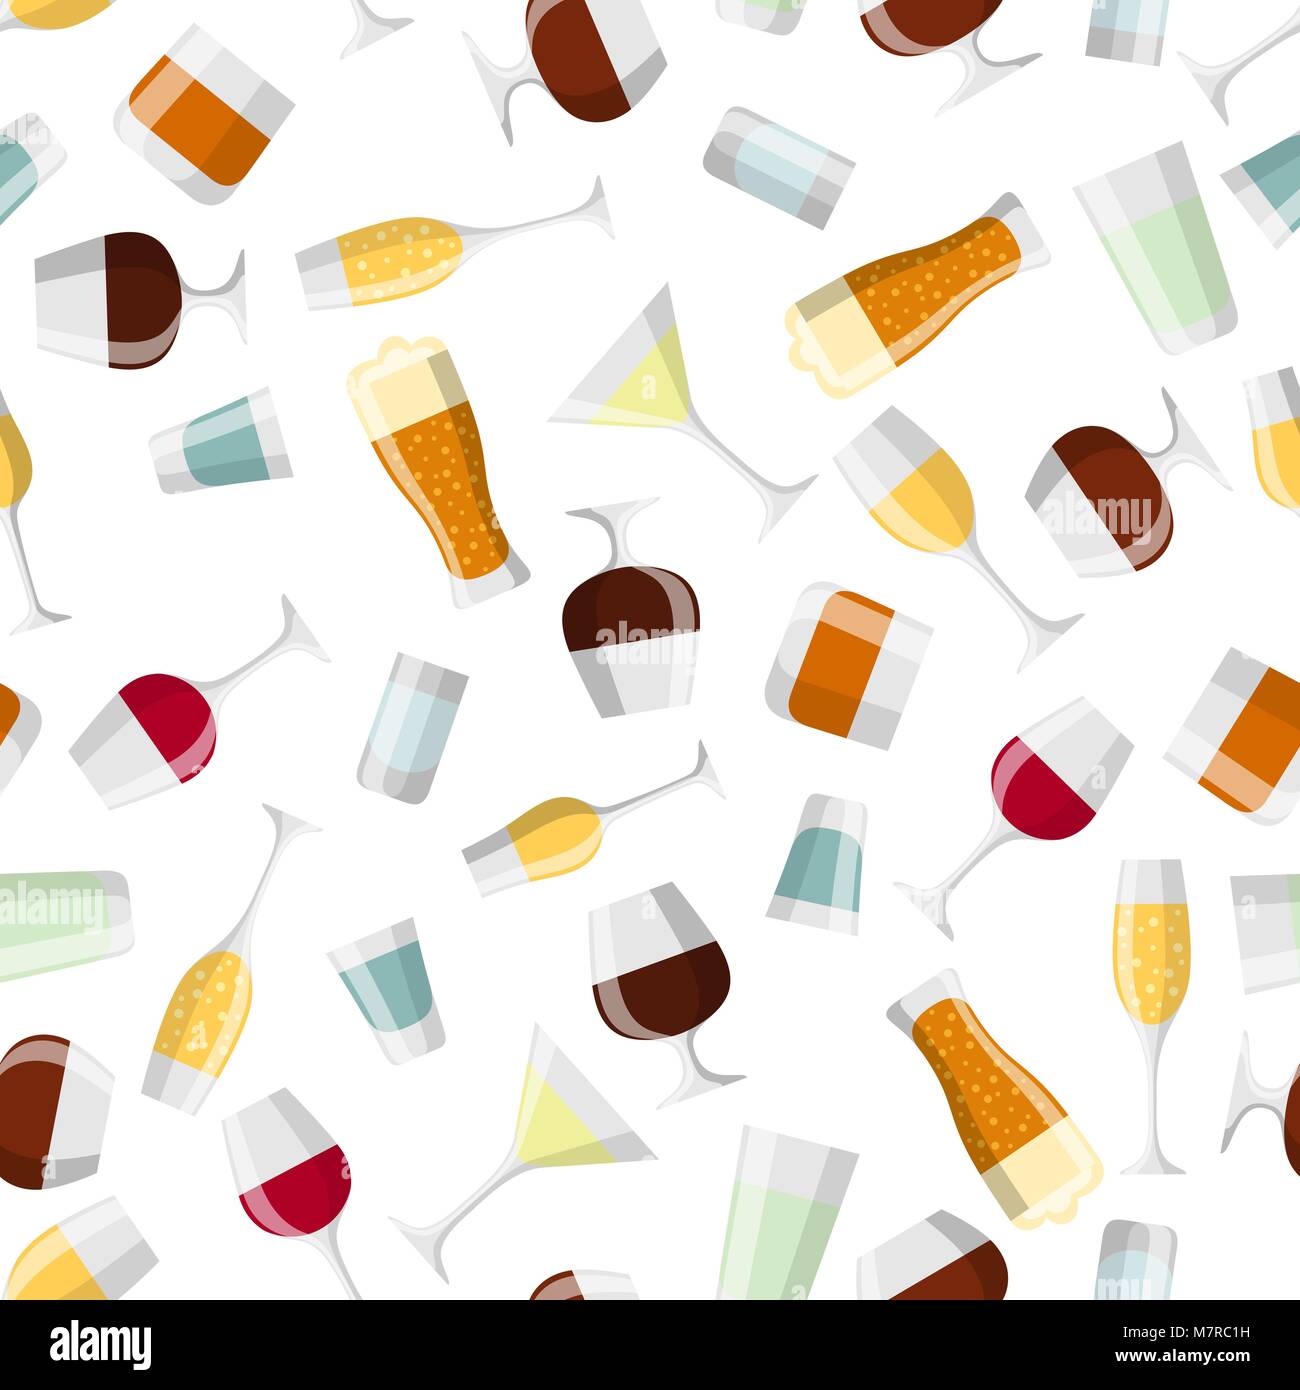 Alcohol drinks seamless pattern. Glasses for restaurants and bars Stock Vector